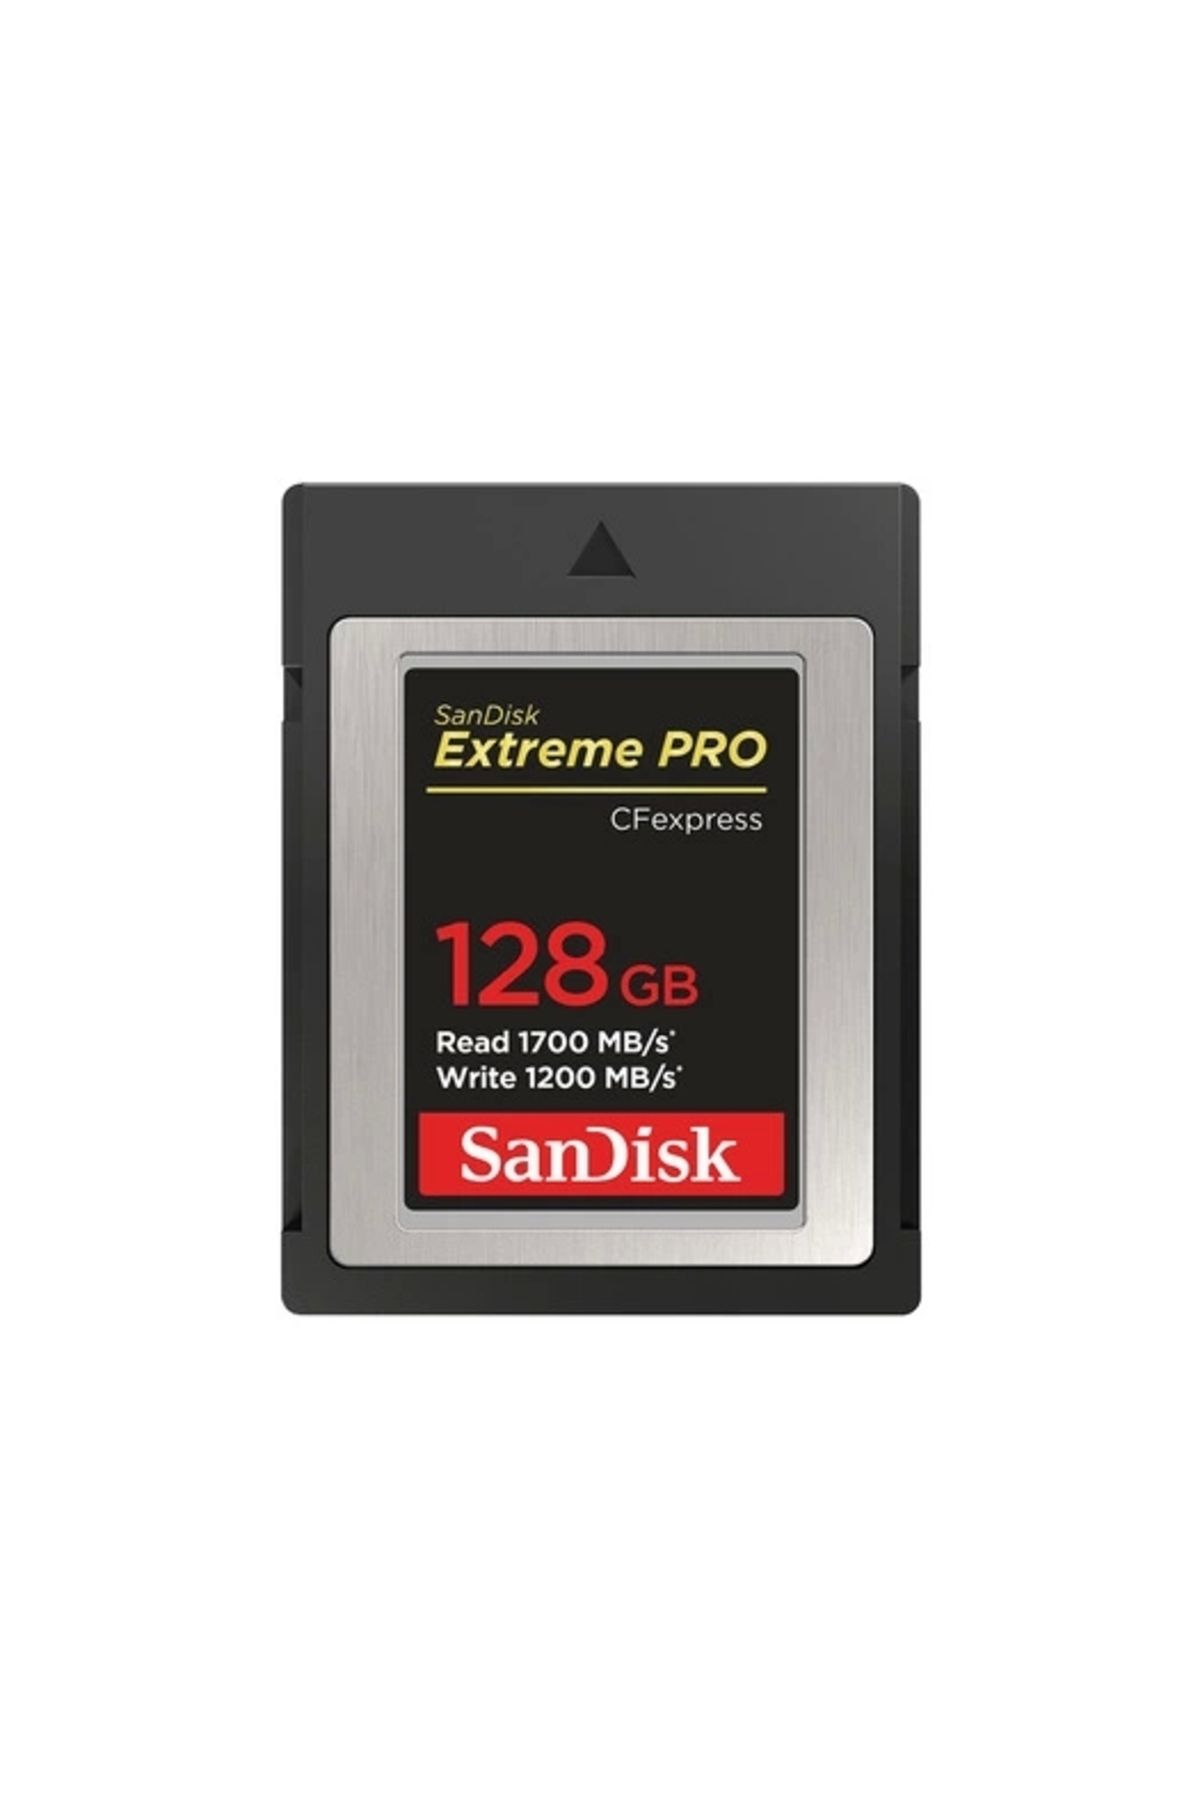 Sandisk Extreme PRO CFexpress Card Type B, 128GB, 1700MB/s Read, 1200MB/s Write